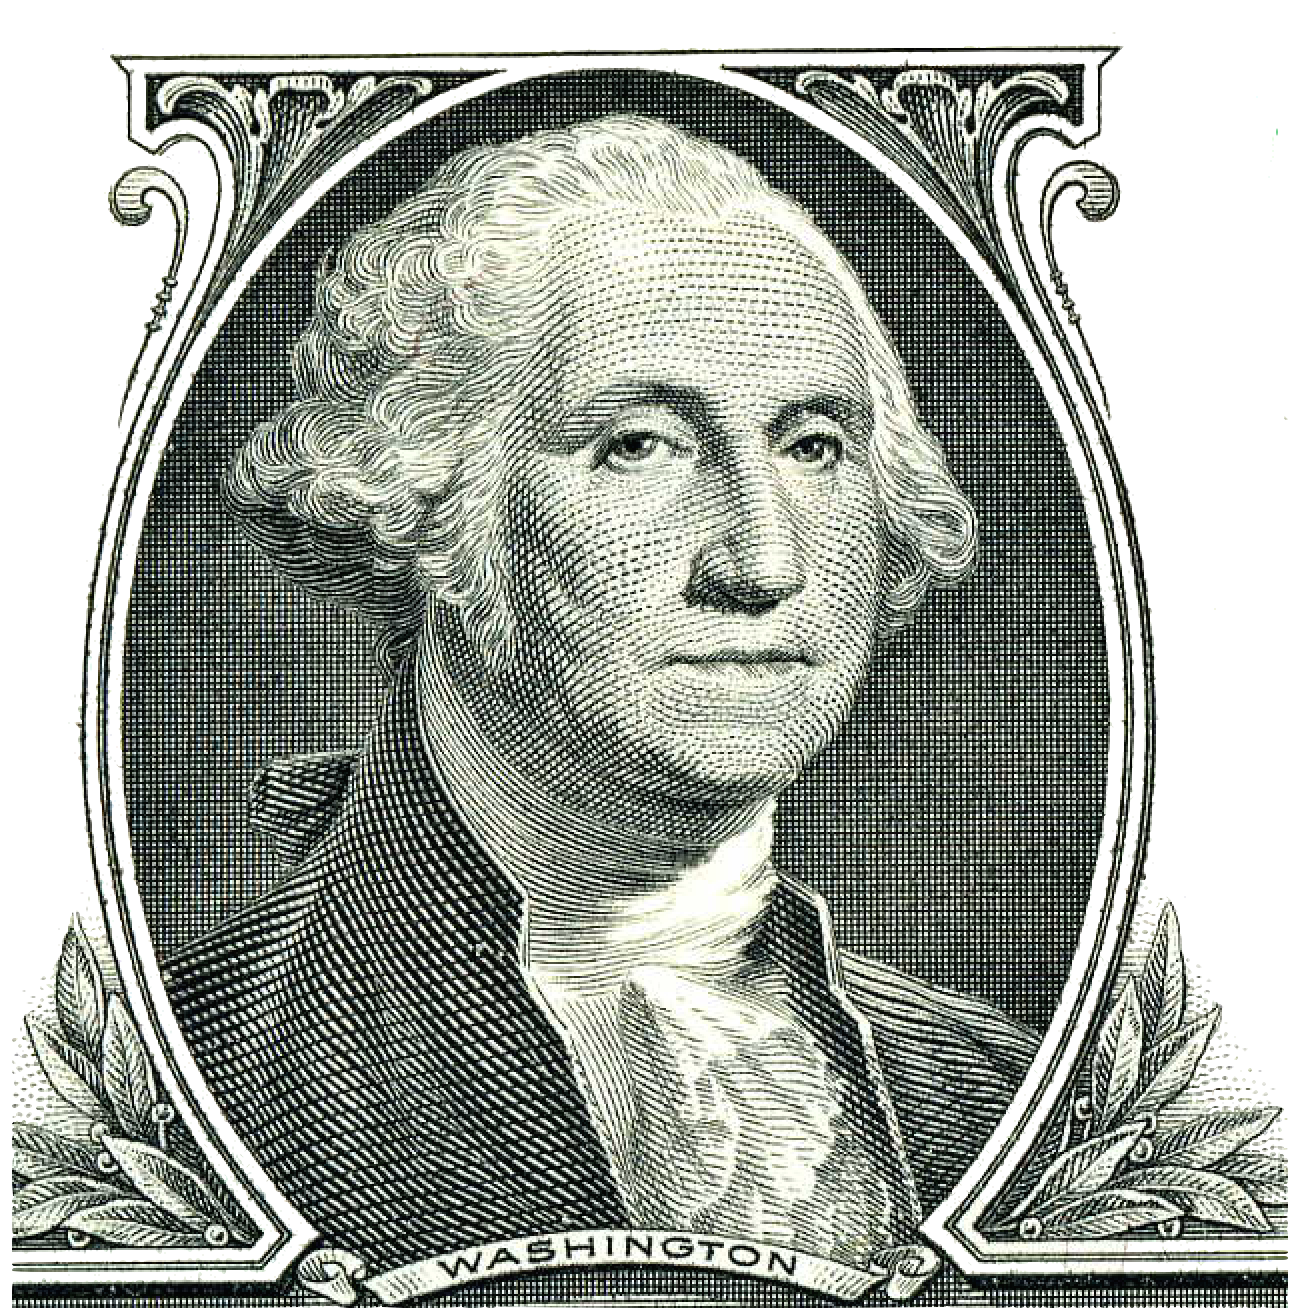 Graphic image of George Washington as he appears on the one dollar bill